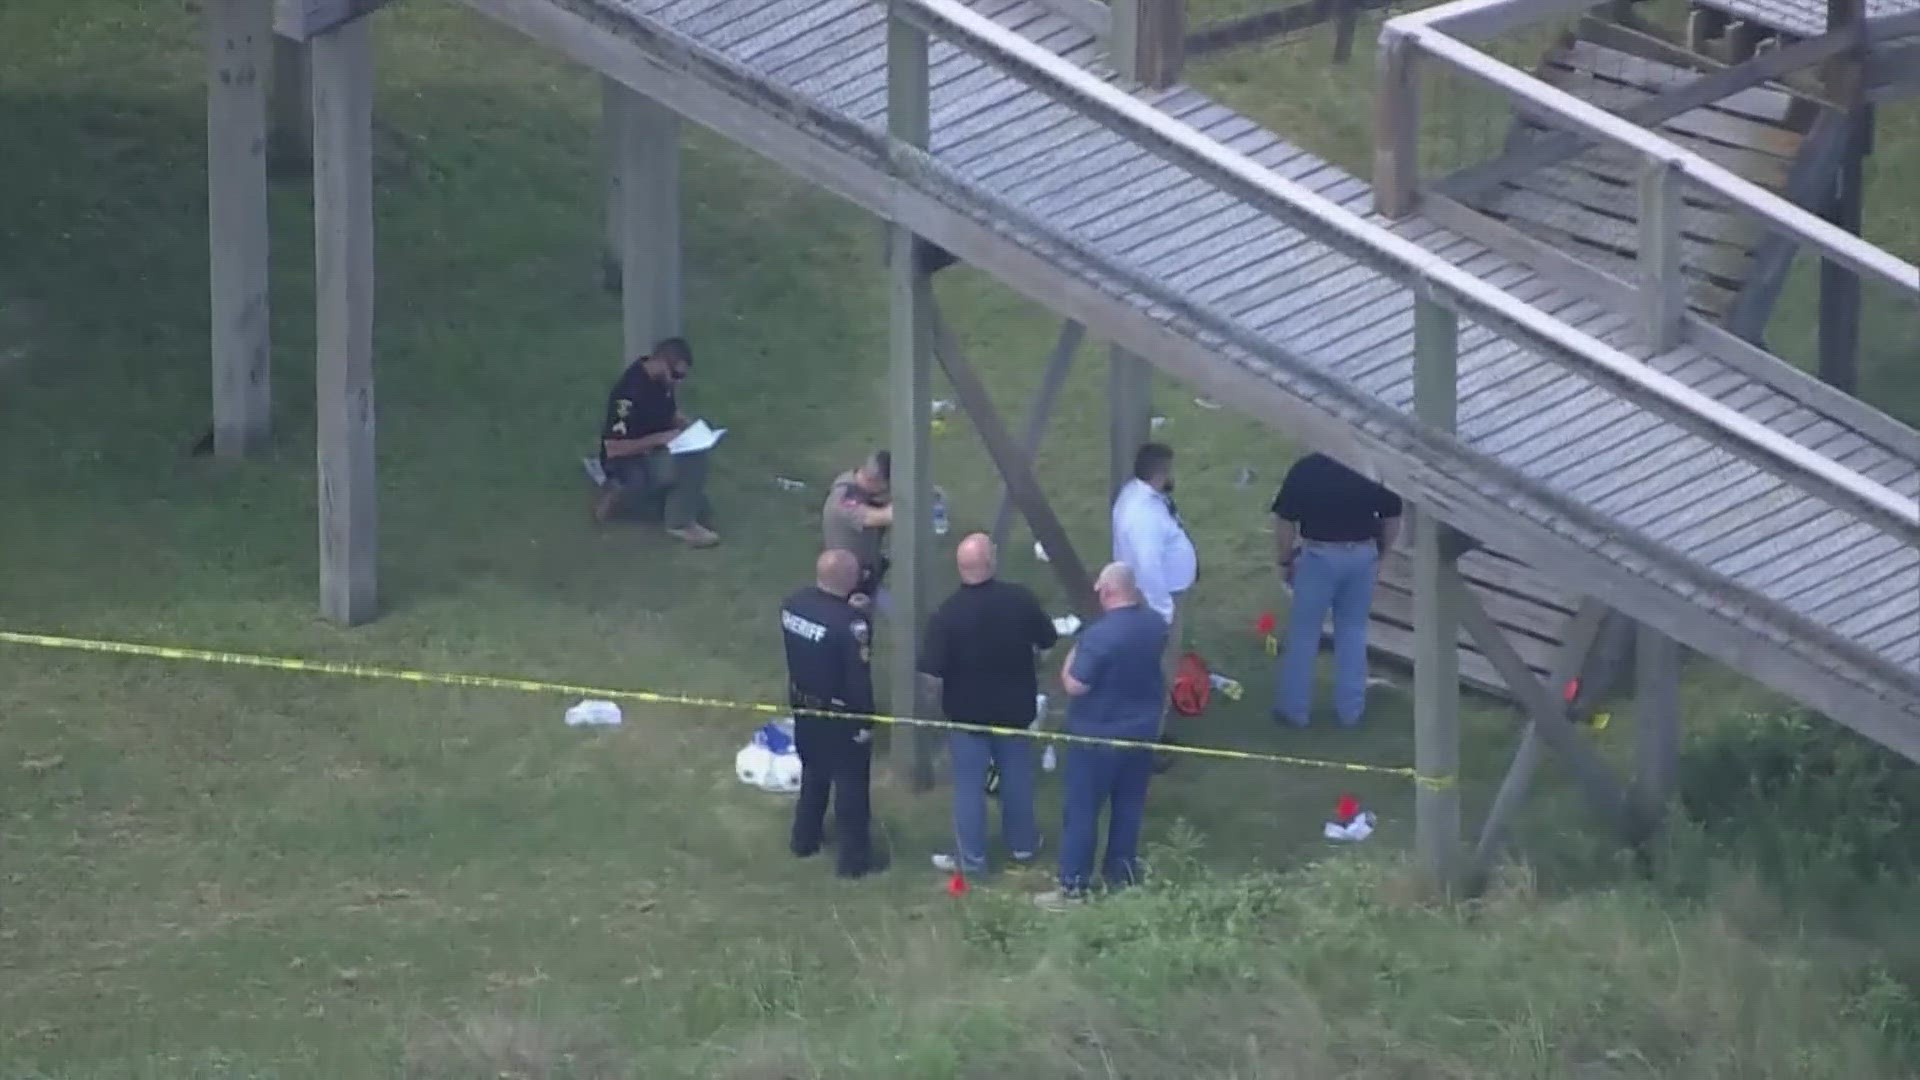 Nearly two dozen teens who were at a summer camp were injured when part of an elevated walkway collapsed at a park in Surfside Beach.